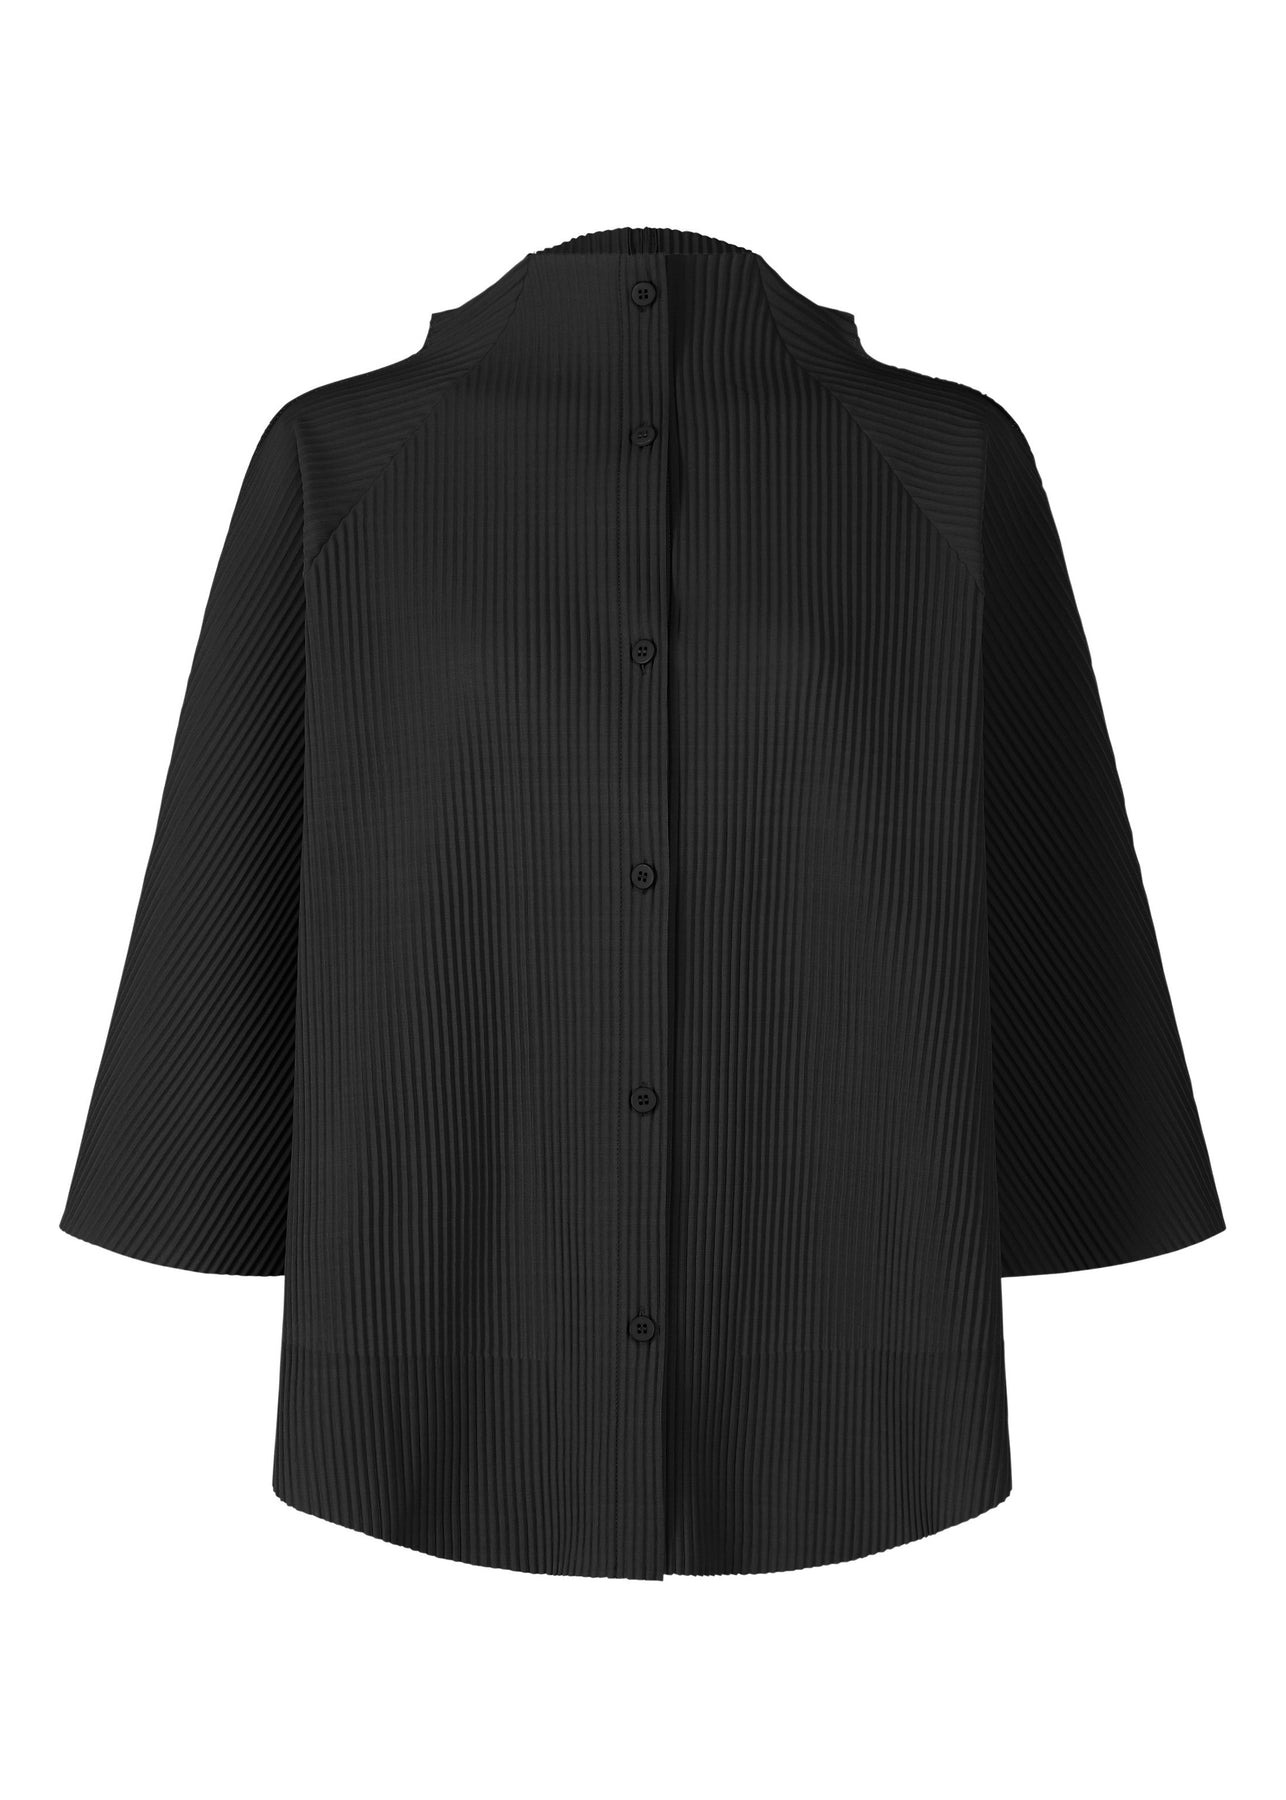 WING PLEATS CARDIGAN | The official ISSEY MIYAKE ONLINE STORE 